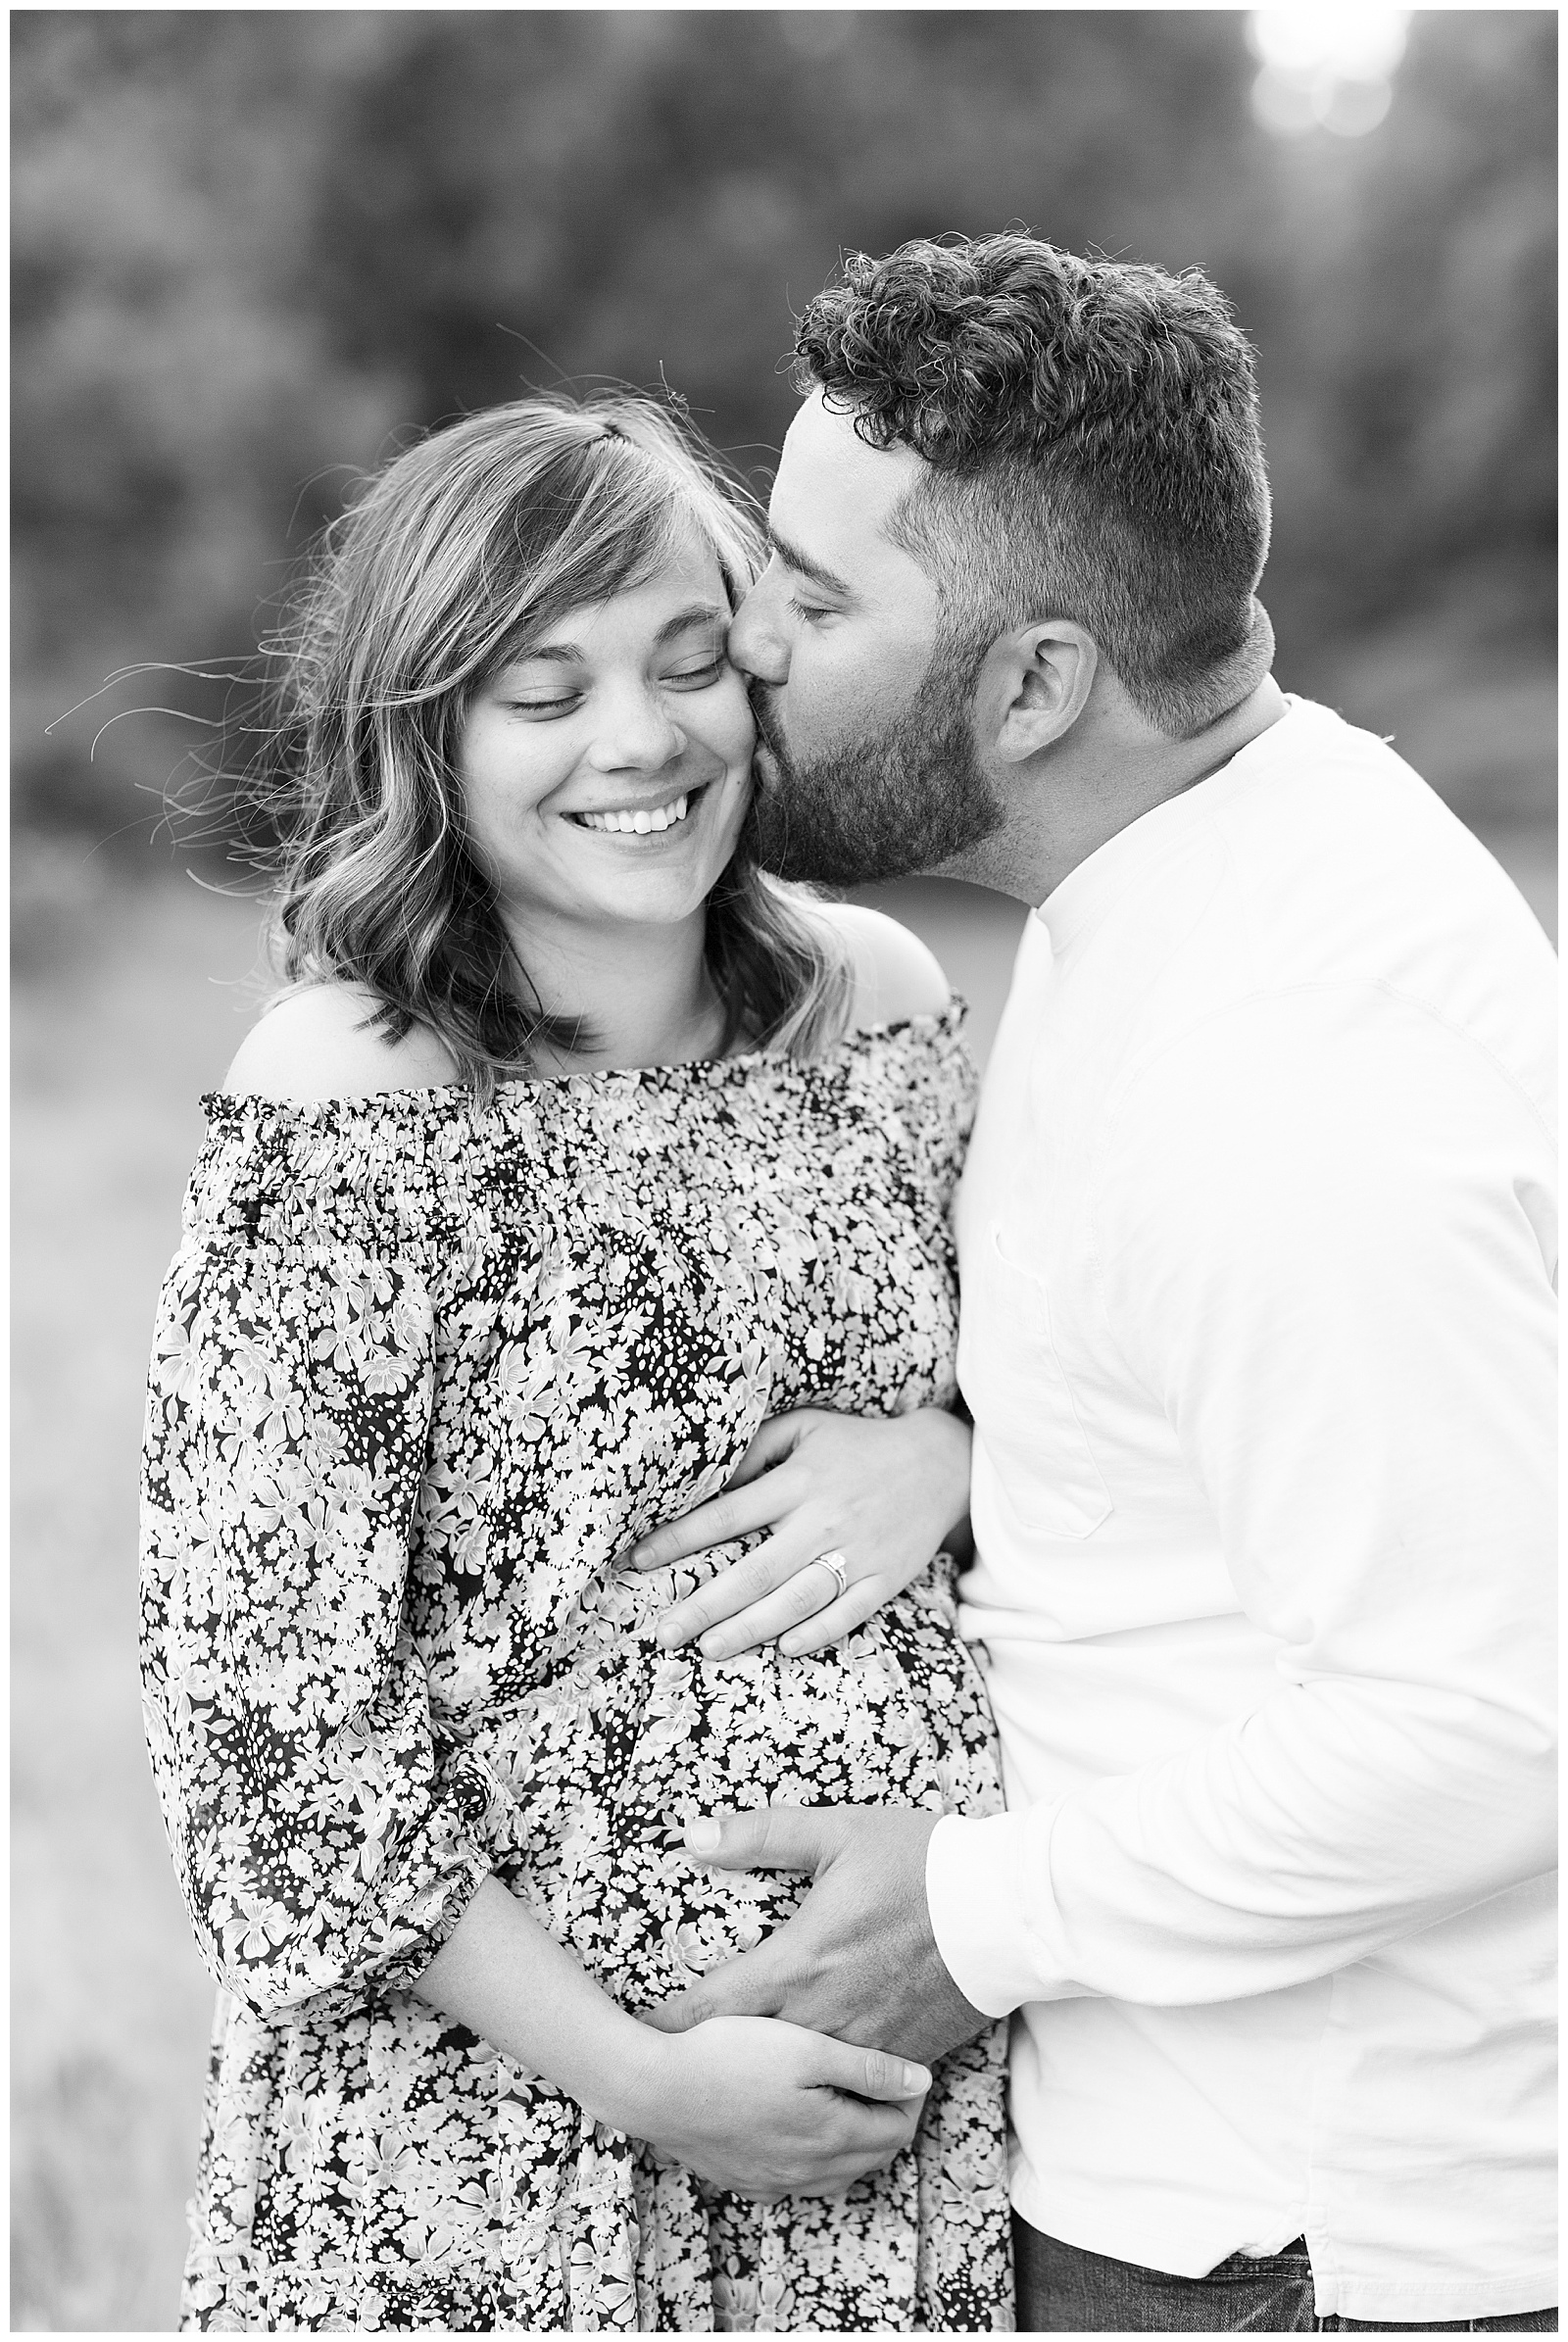 black and white photo of husband kissing wife on cheek smiling